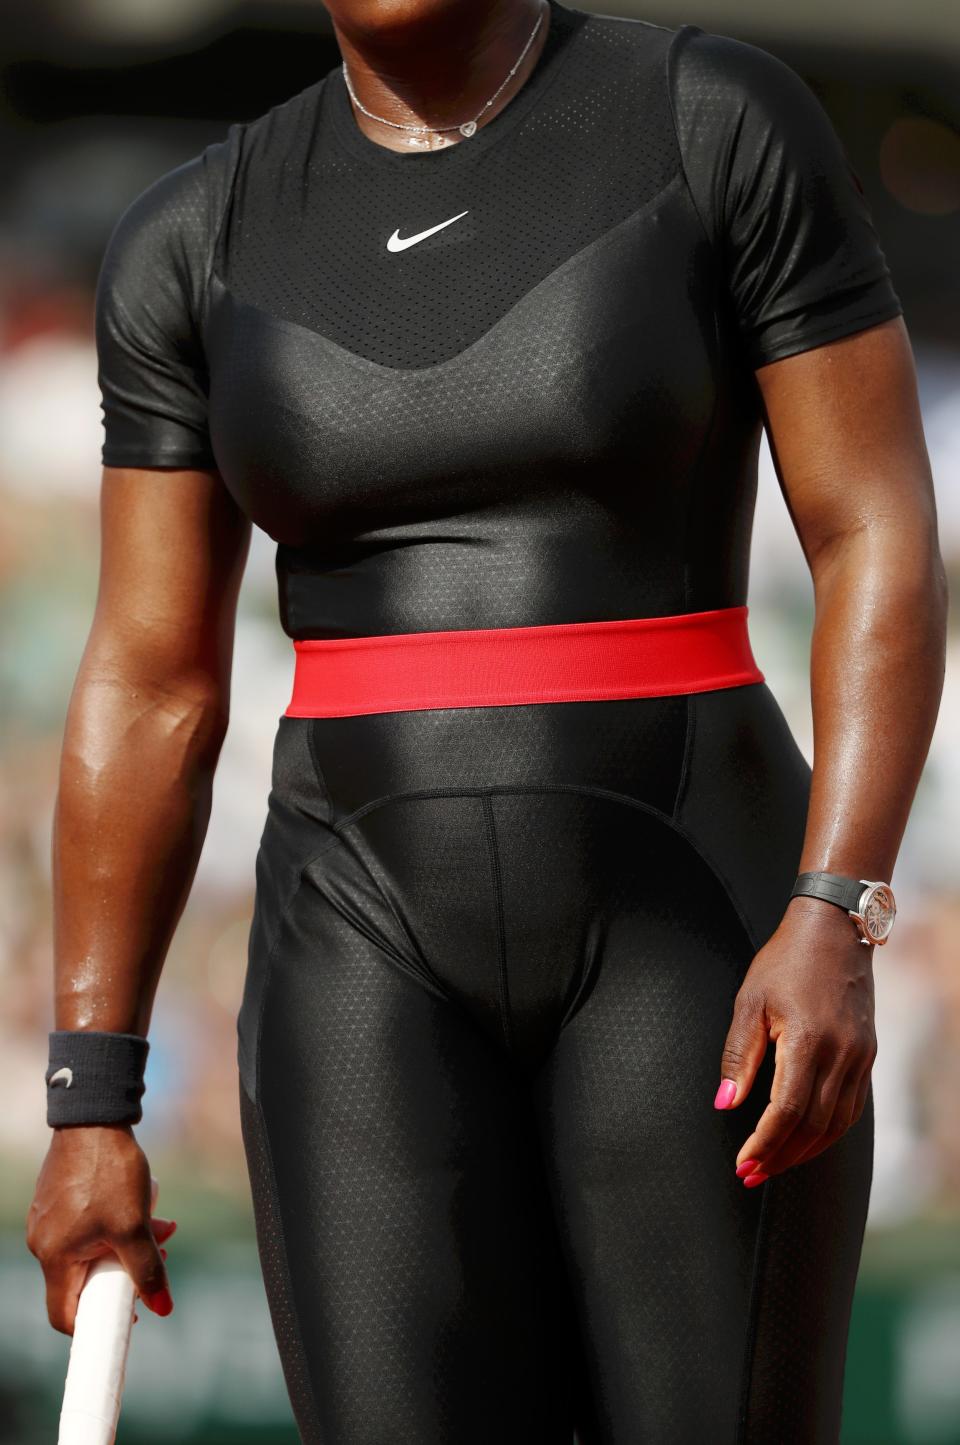 Serena Williams wears her iconic catsuit to the 2018 French Open.